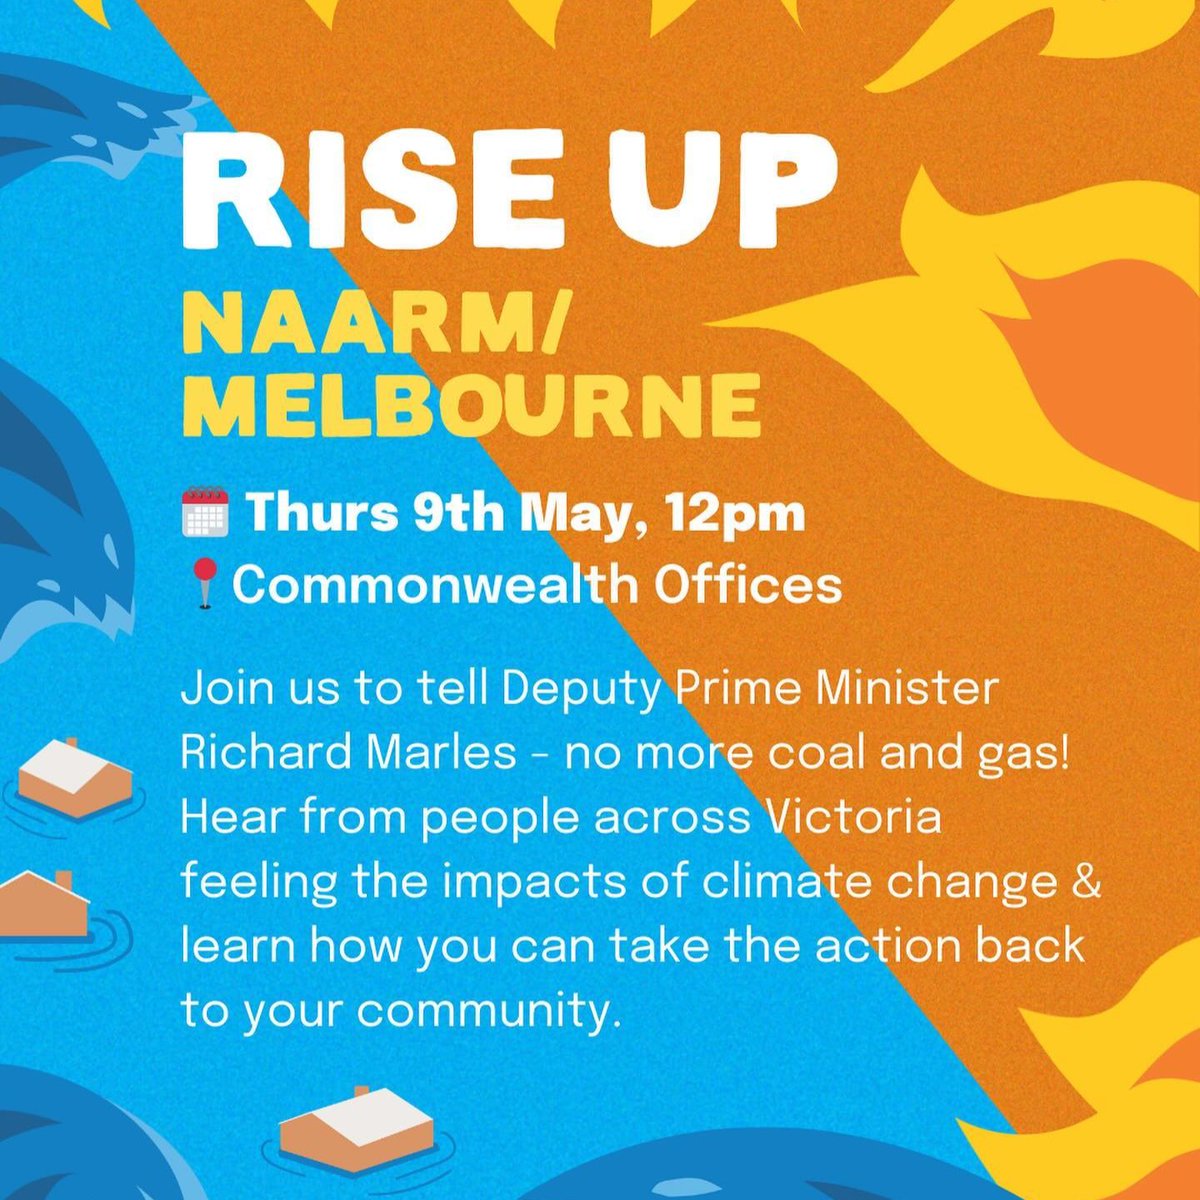 This Thursday at 12pm, @MoveBeyondCoal, @350Australia, @AusConservation, @AYCC and @GetUp are rising up and saying No More Coal and Gas! 

Join them at 4 Treasury Place - details and RSVP here: actionnetwork.org/events/rise-up…